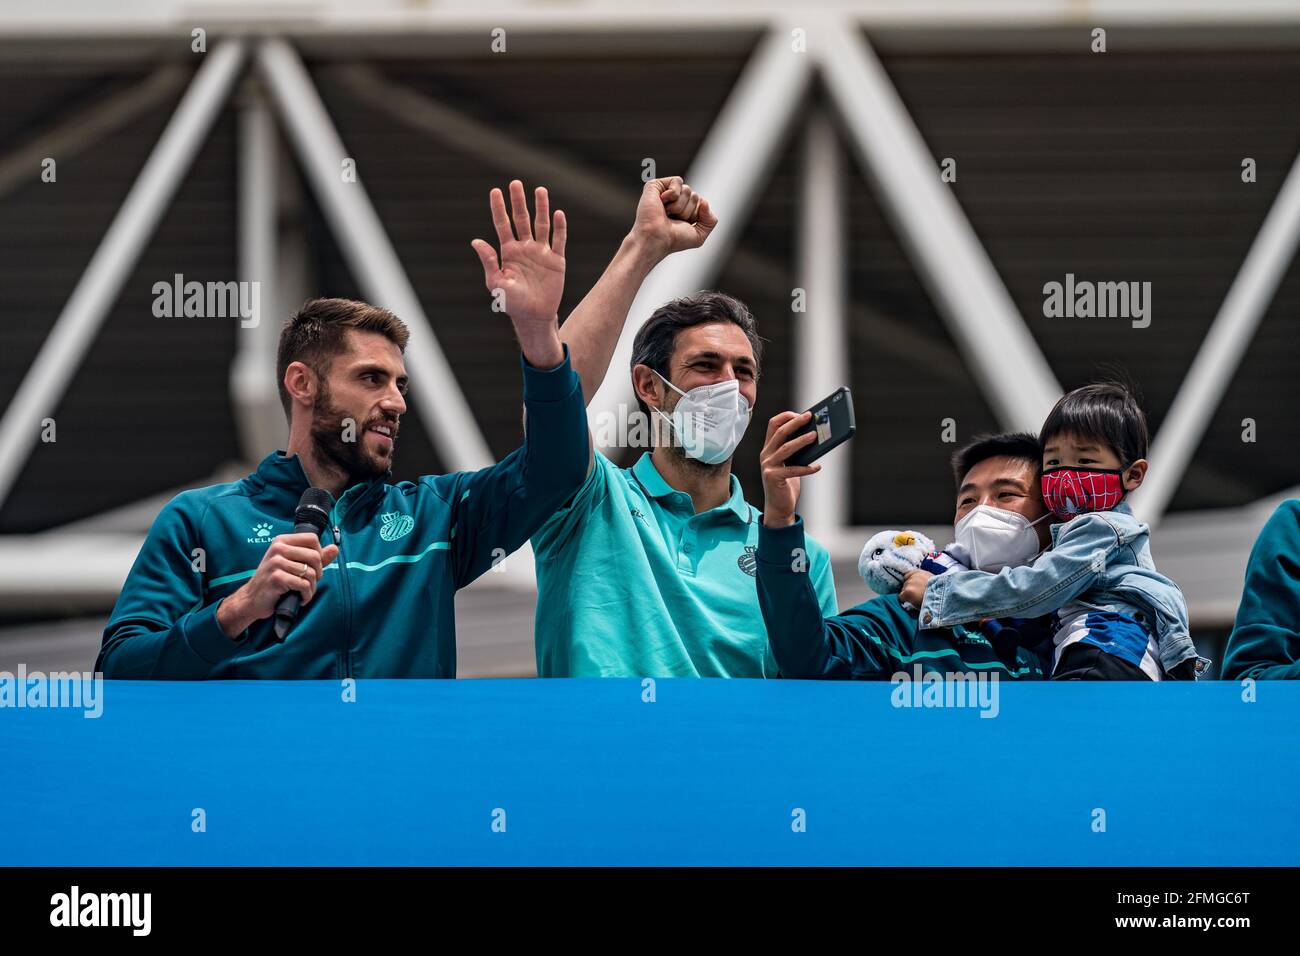 Cornella, Spain. 9th May, 2021. RCD Espanyol's player David Lopez (1st L) speaks during the celebration of the team's return to the Spanish First Division at RCDE Stadium, Cornella, Spain, May 9, 2021. Credit: Joan Gosa/Xinhua/Alamy Live News Stock Photo